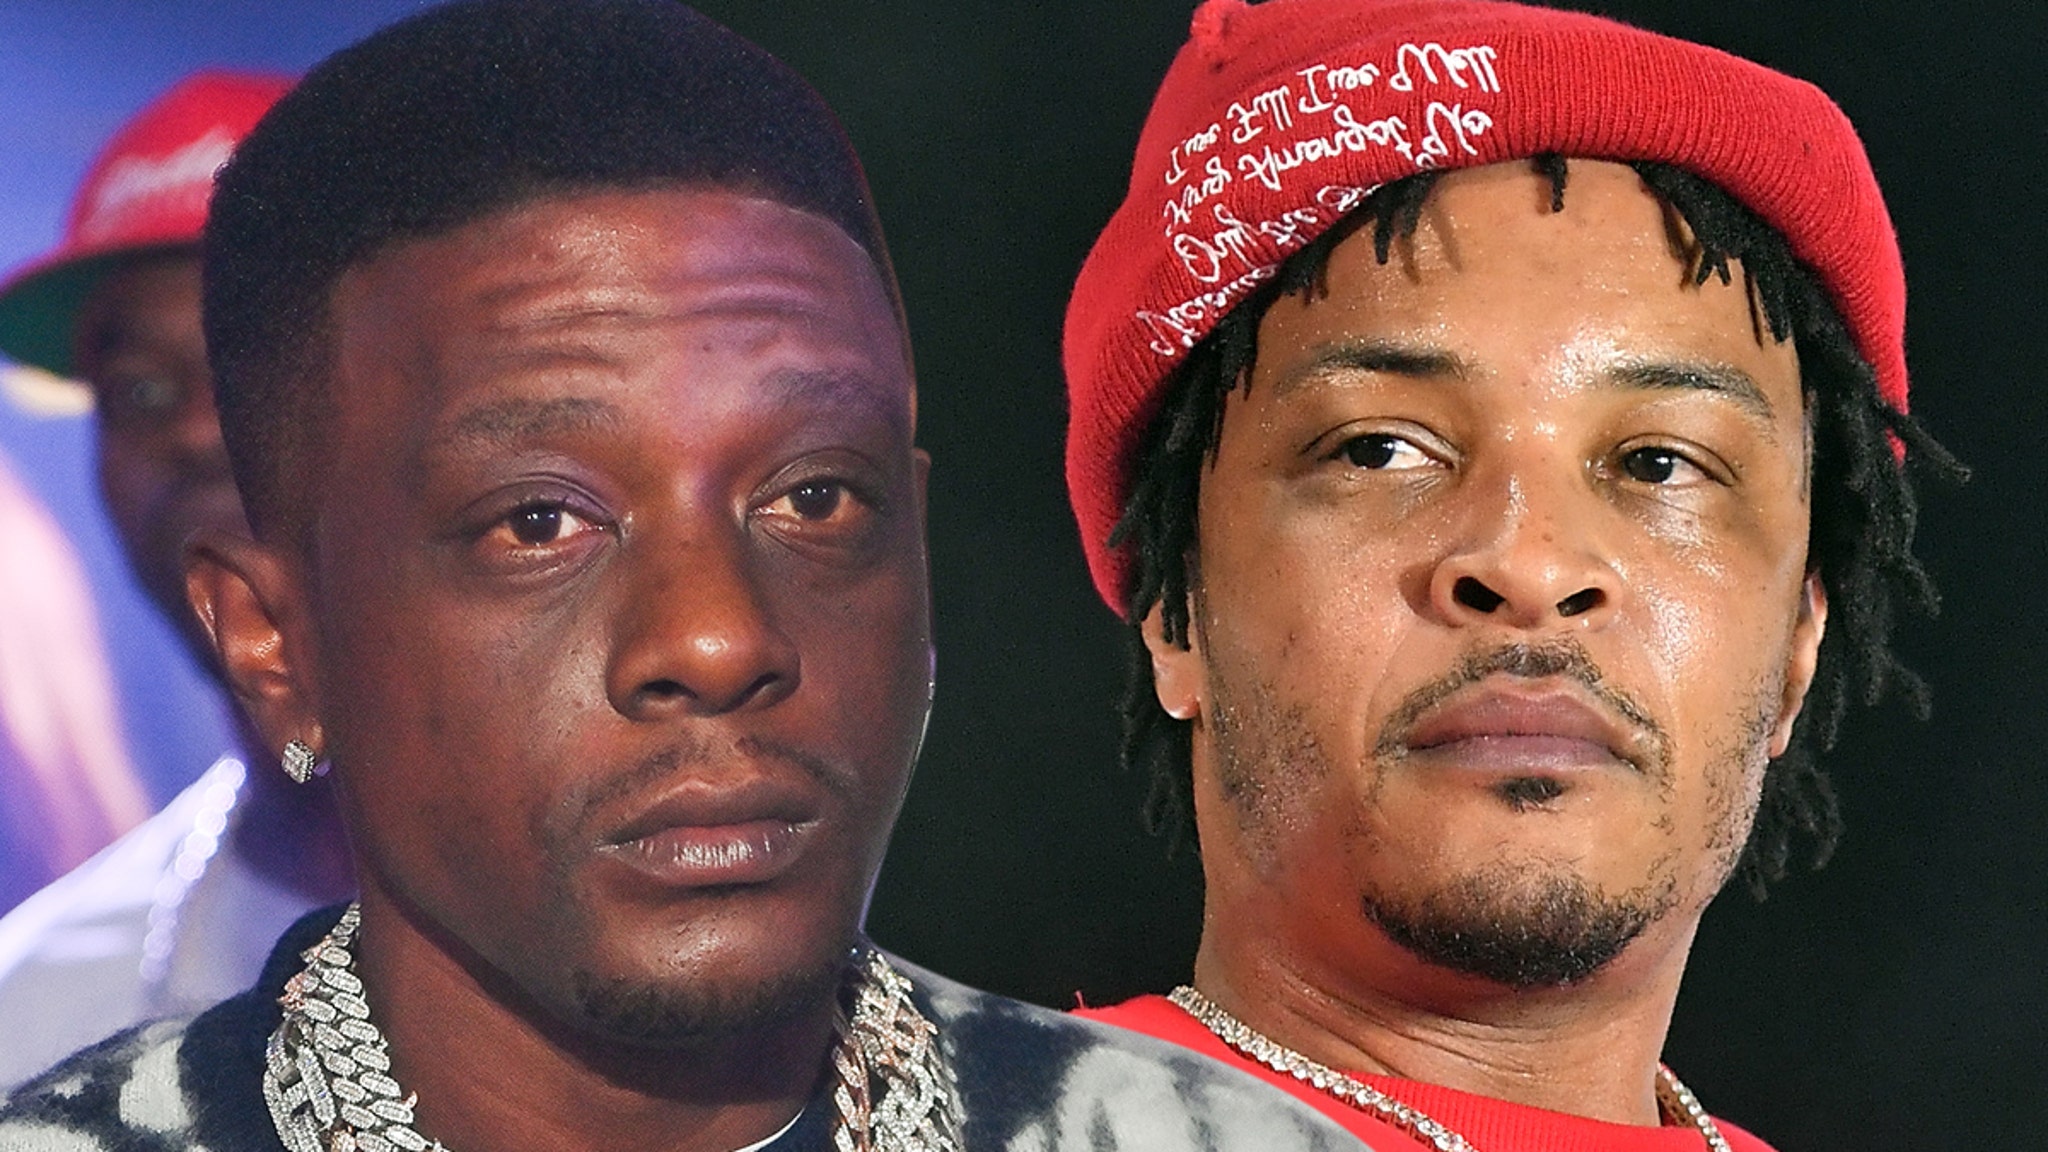 Boosie Badazz Cancels Collab Album After T.I.’s Dead Cousin Snitching Admission